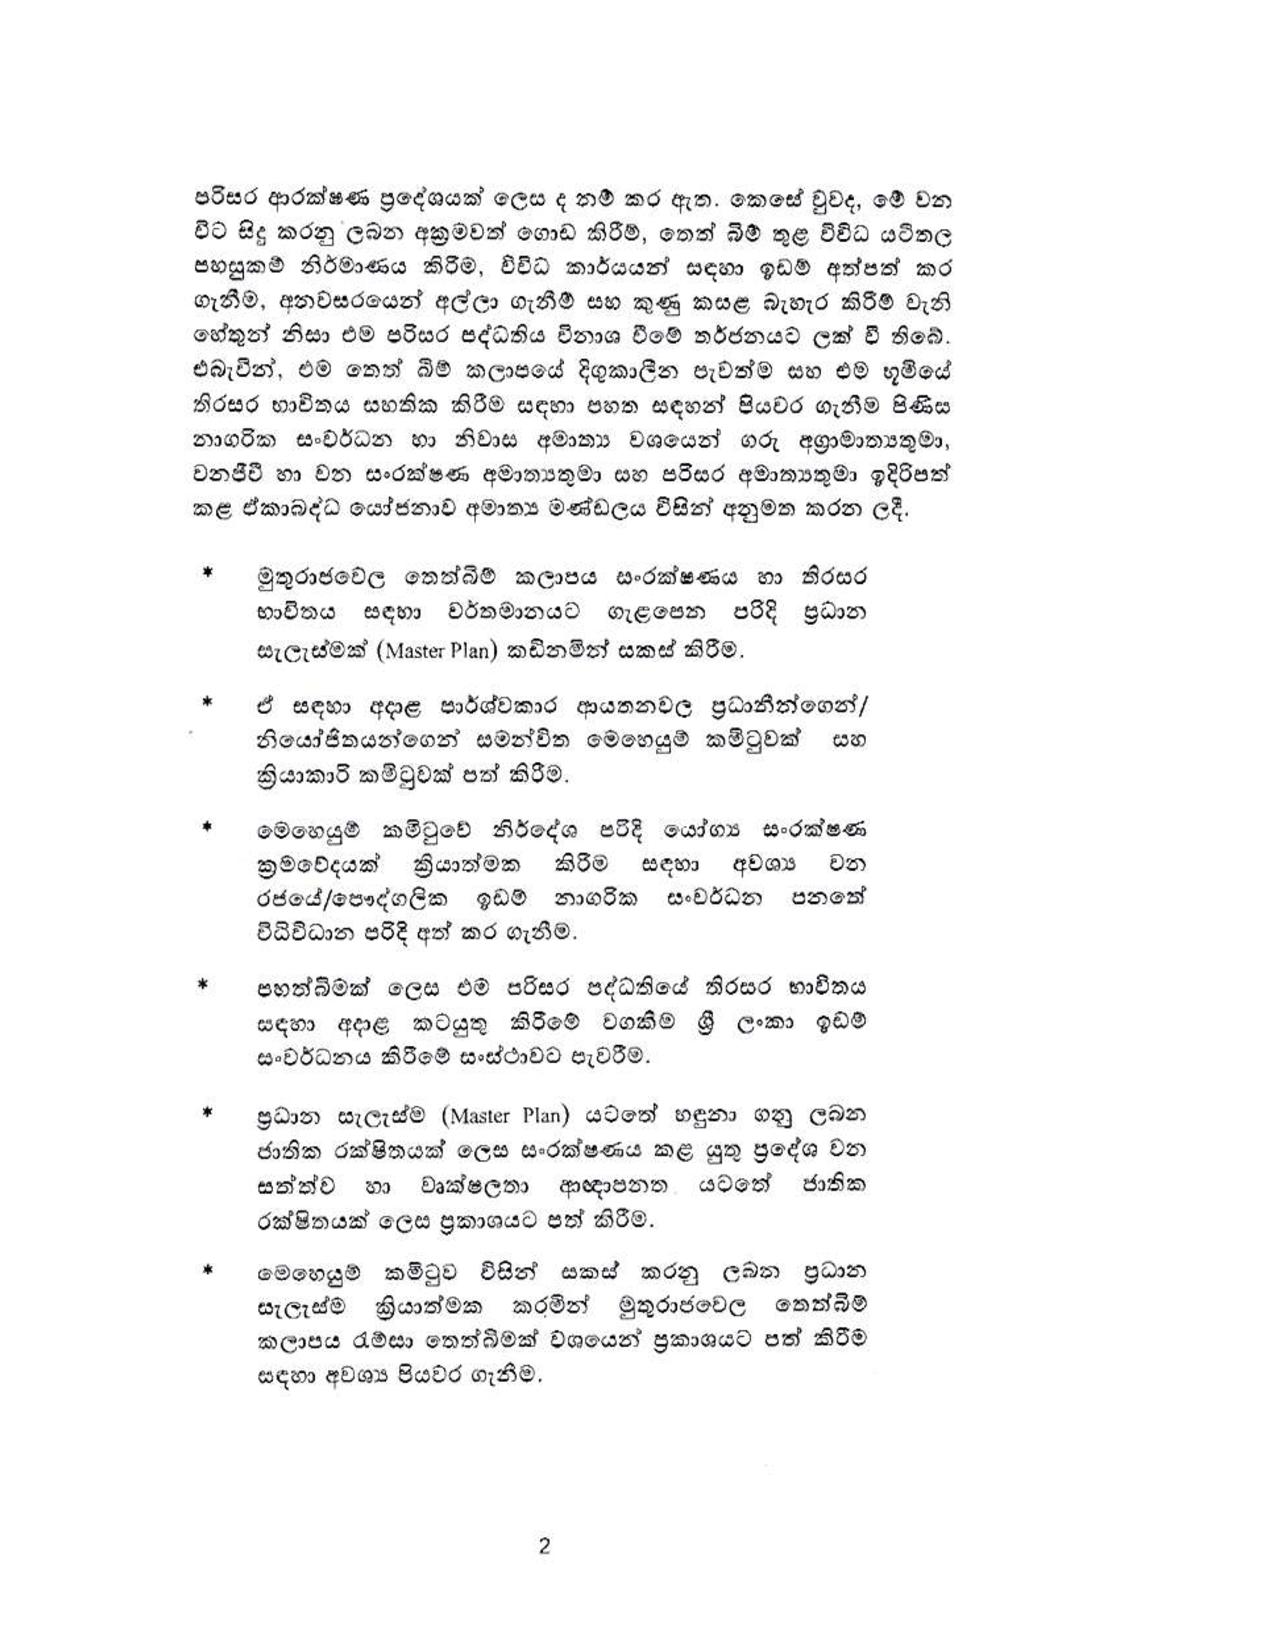 Cabinet Decision on 10.05.2021 page 002